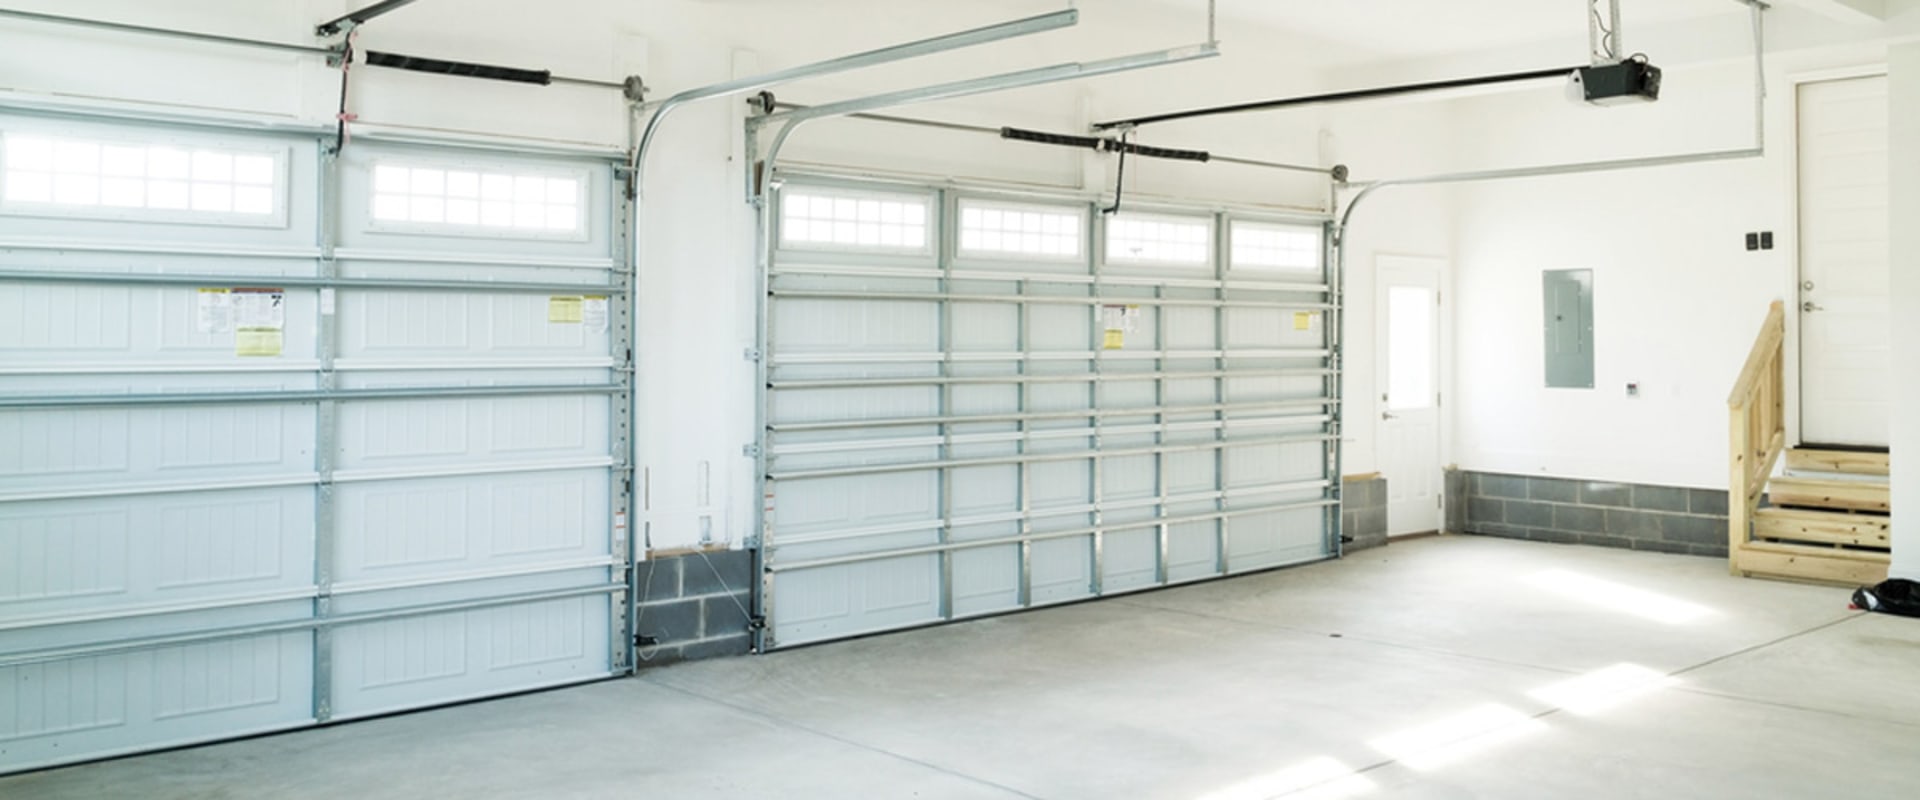 How Much Does it Cost to Replace a Garage Door Opener?